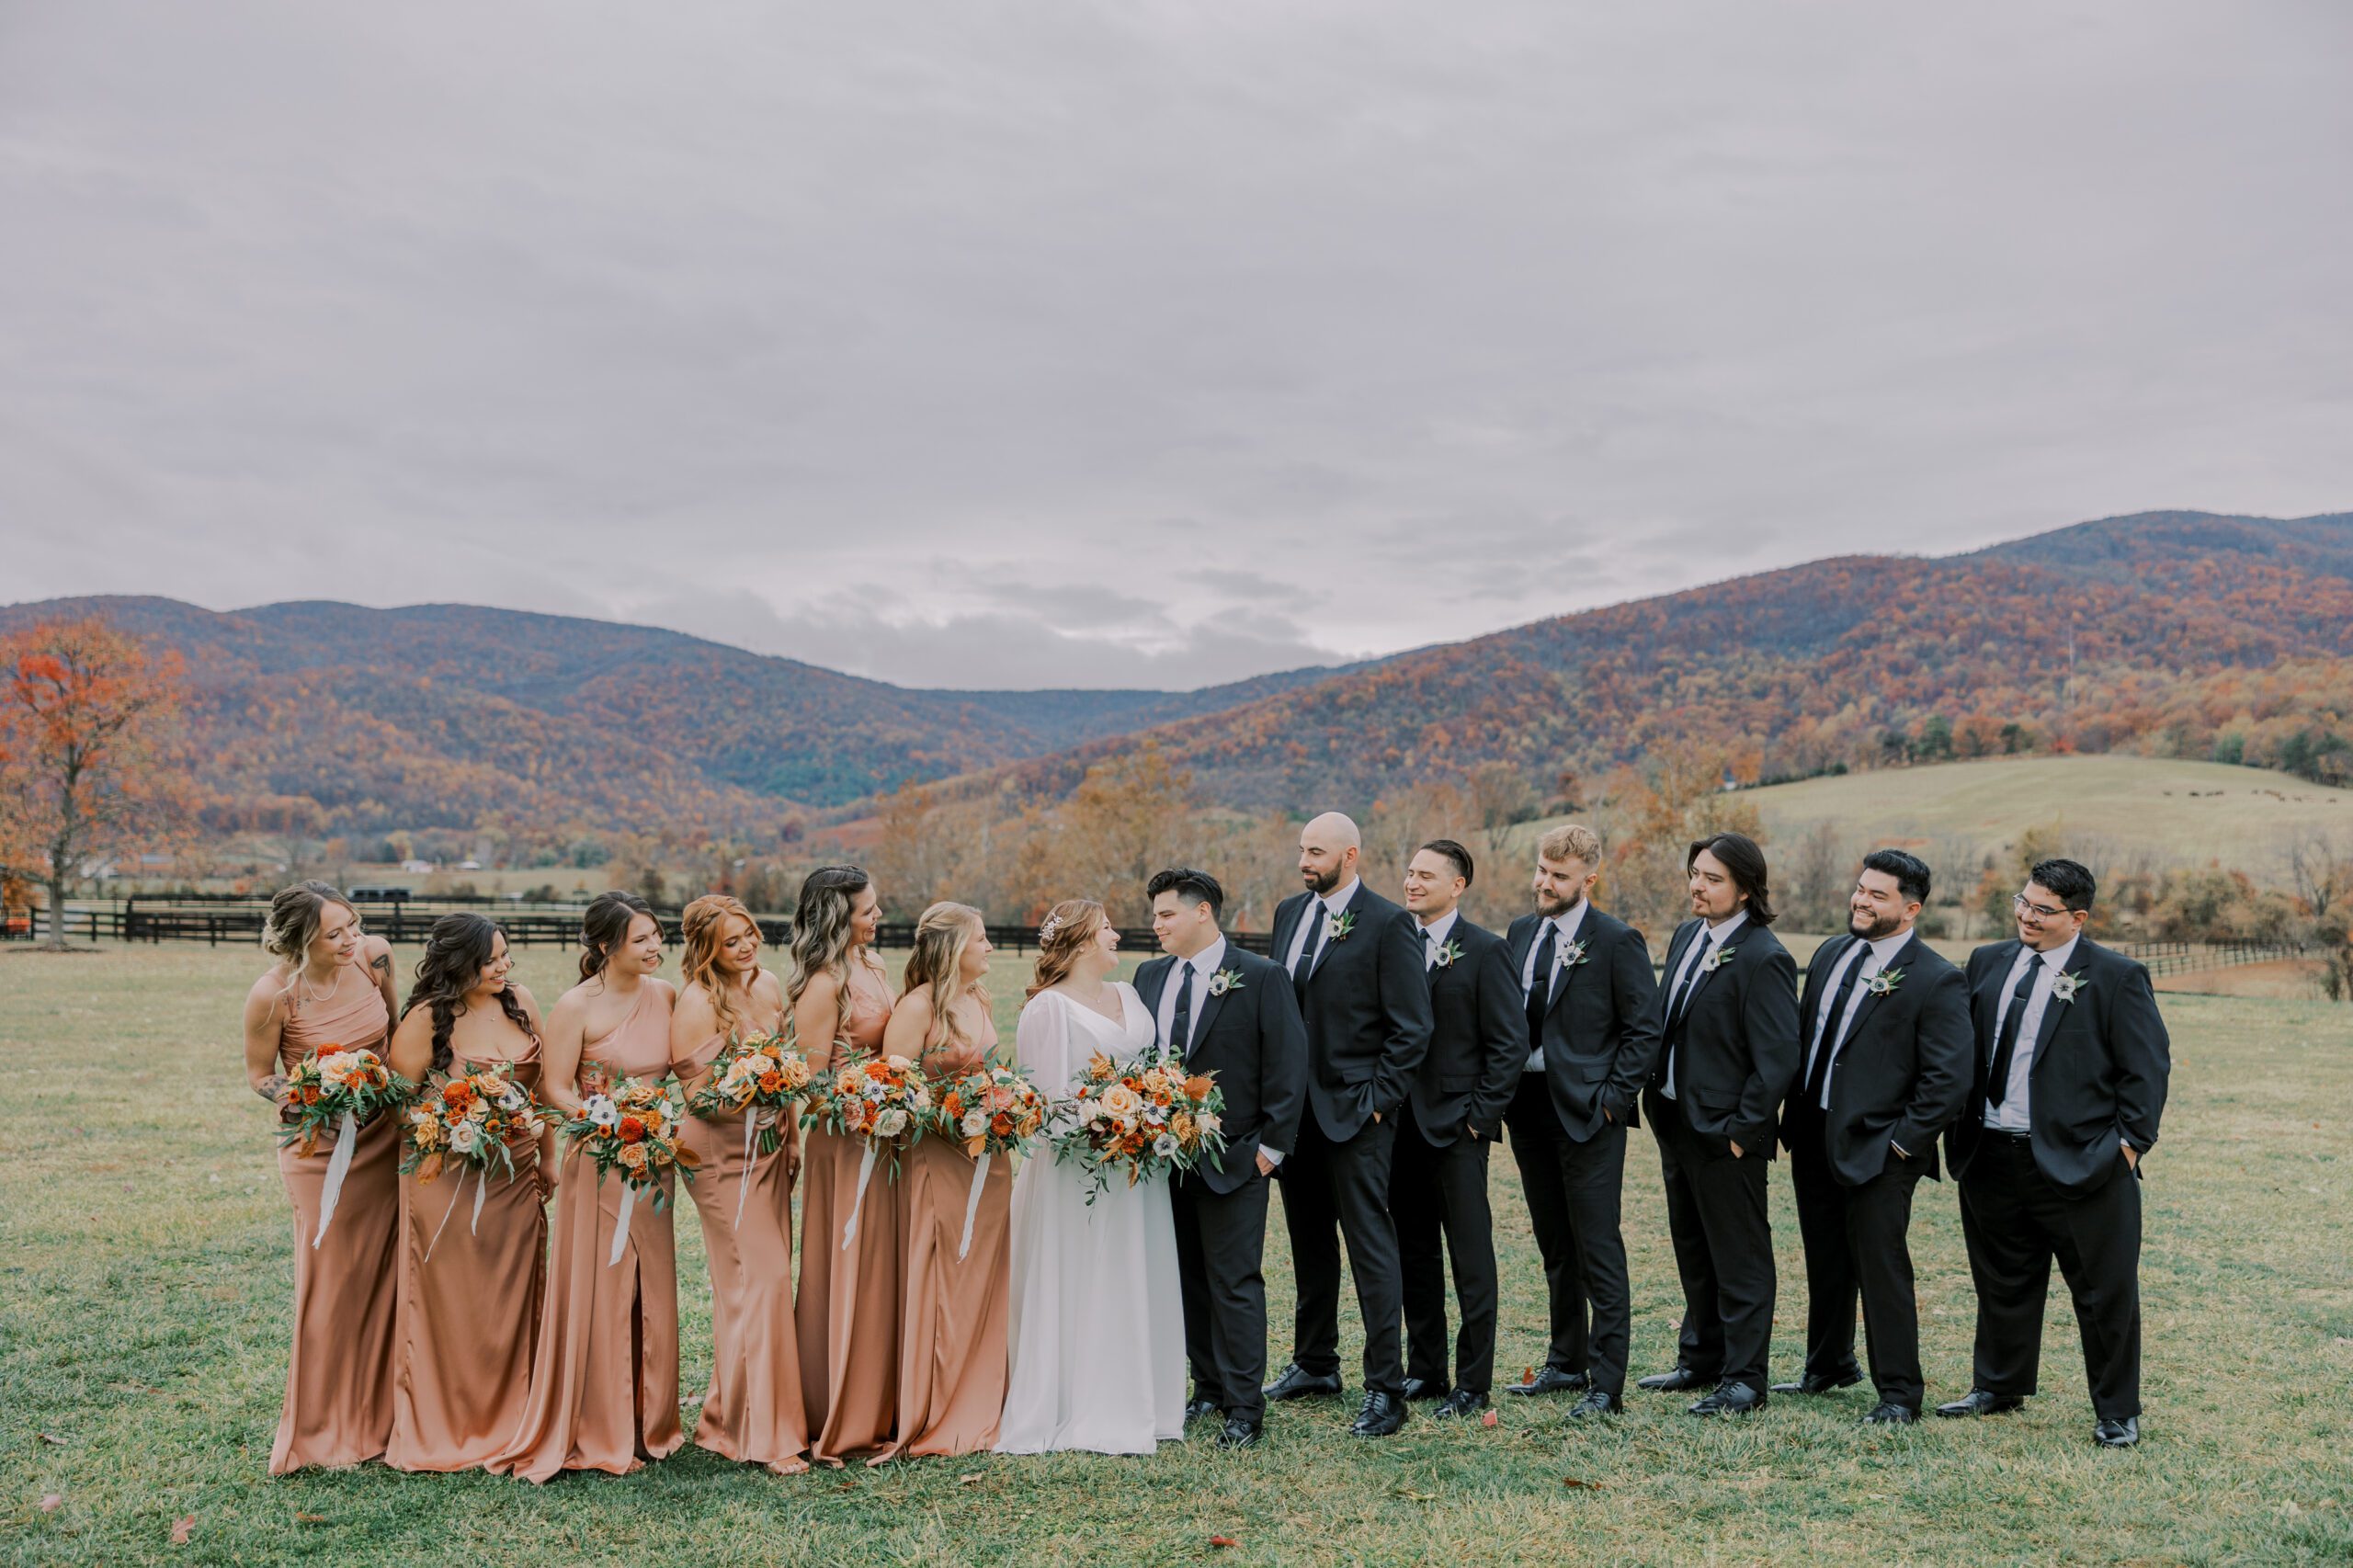 Bride and groom looking at each other surrounded by their bridesmaids and groomsmen on either side of them, mountain scenery in background